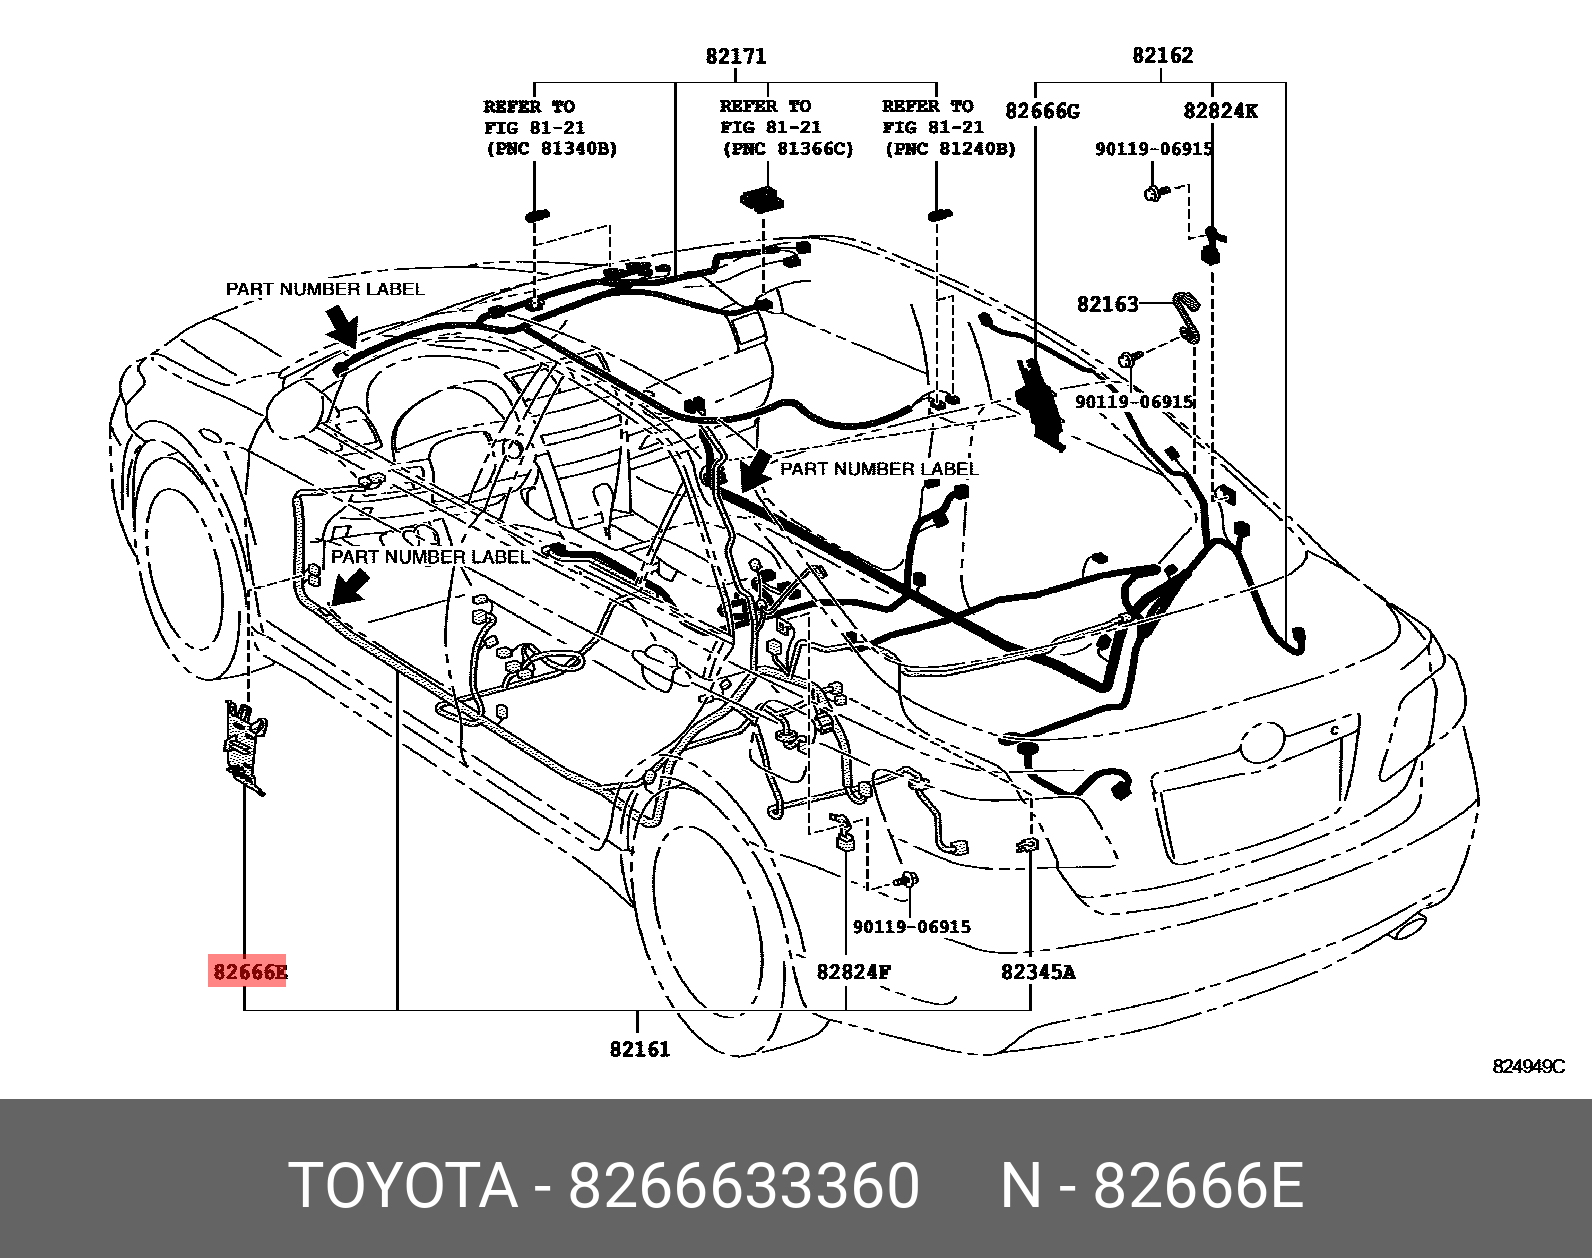 CAMRY 200601 - 201108, HOLDER, CONNECTOR NO.6